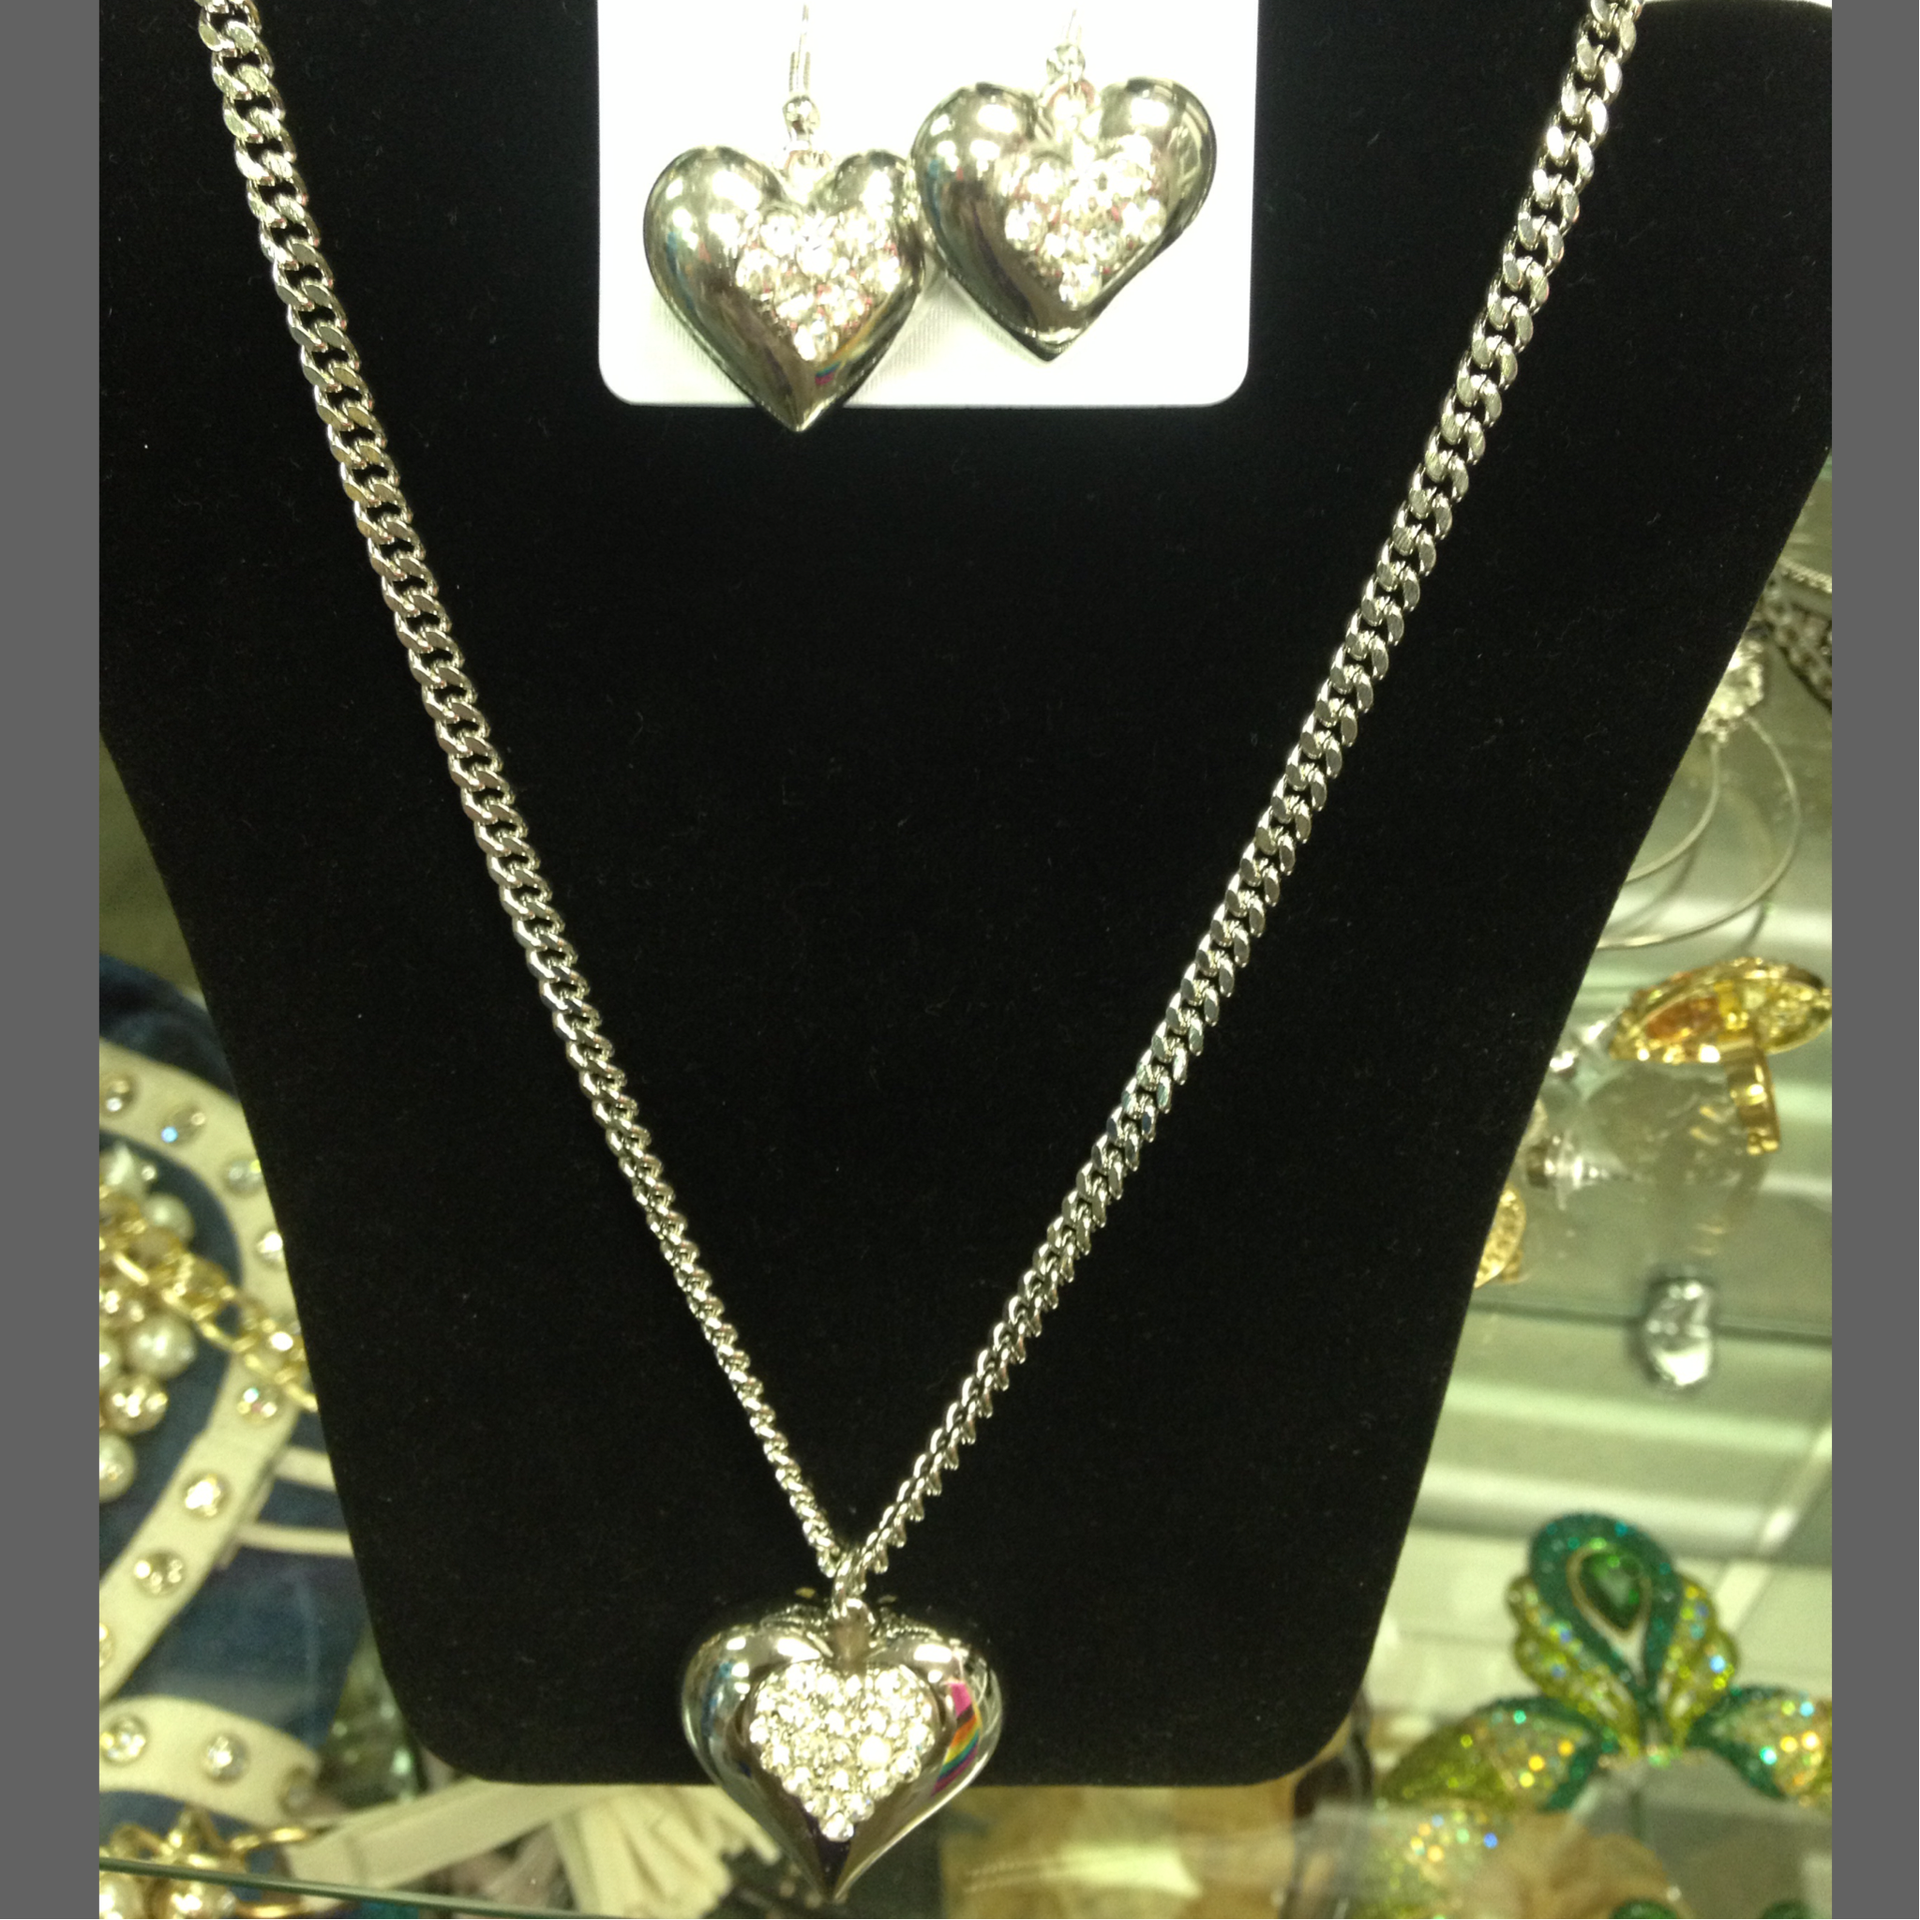 Silver color necklace and earring set with rhinestones $35